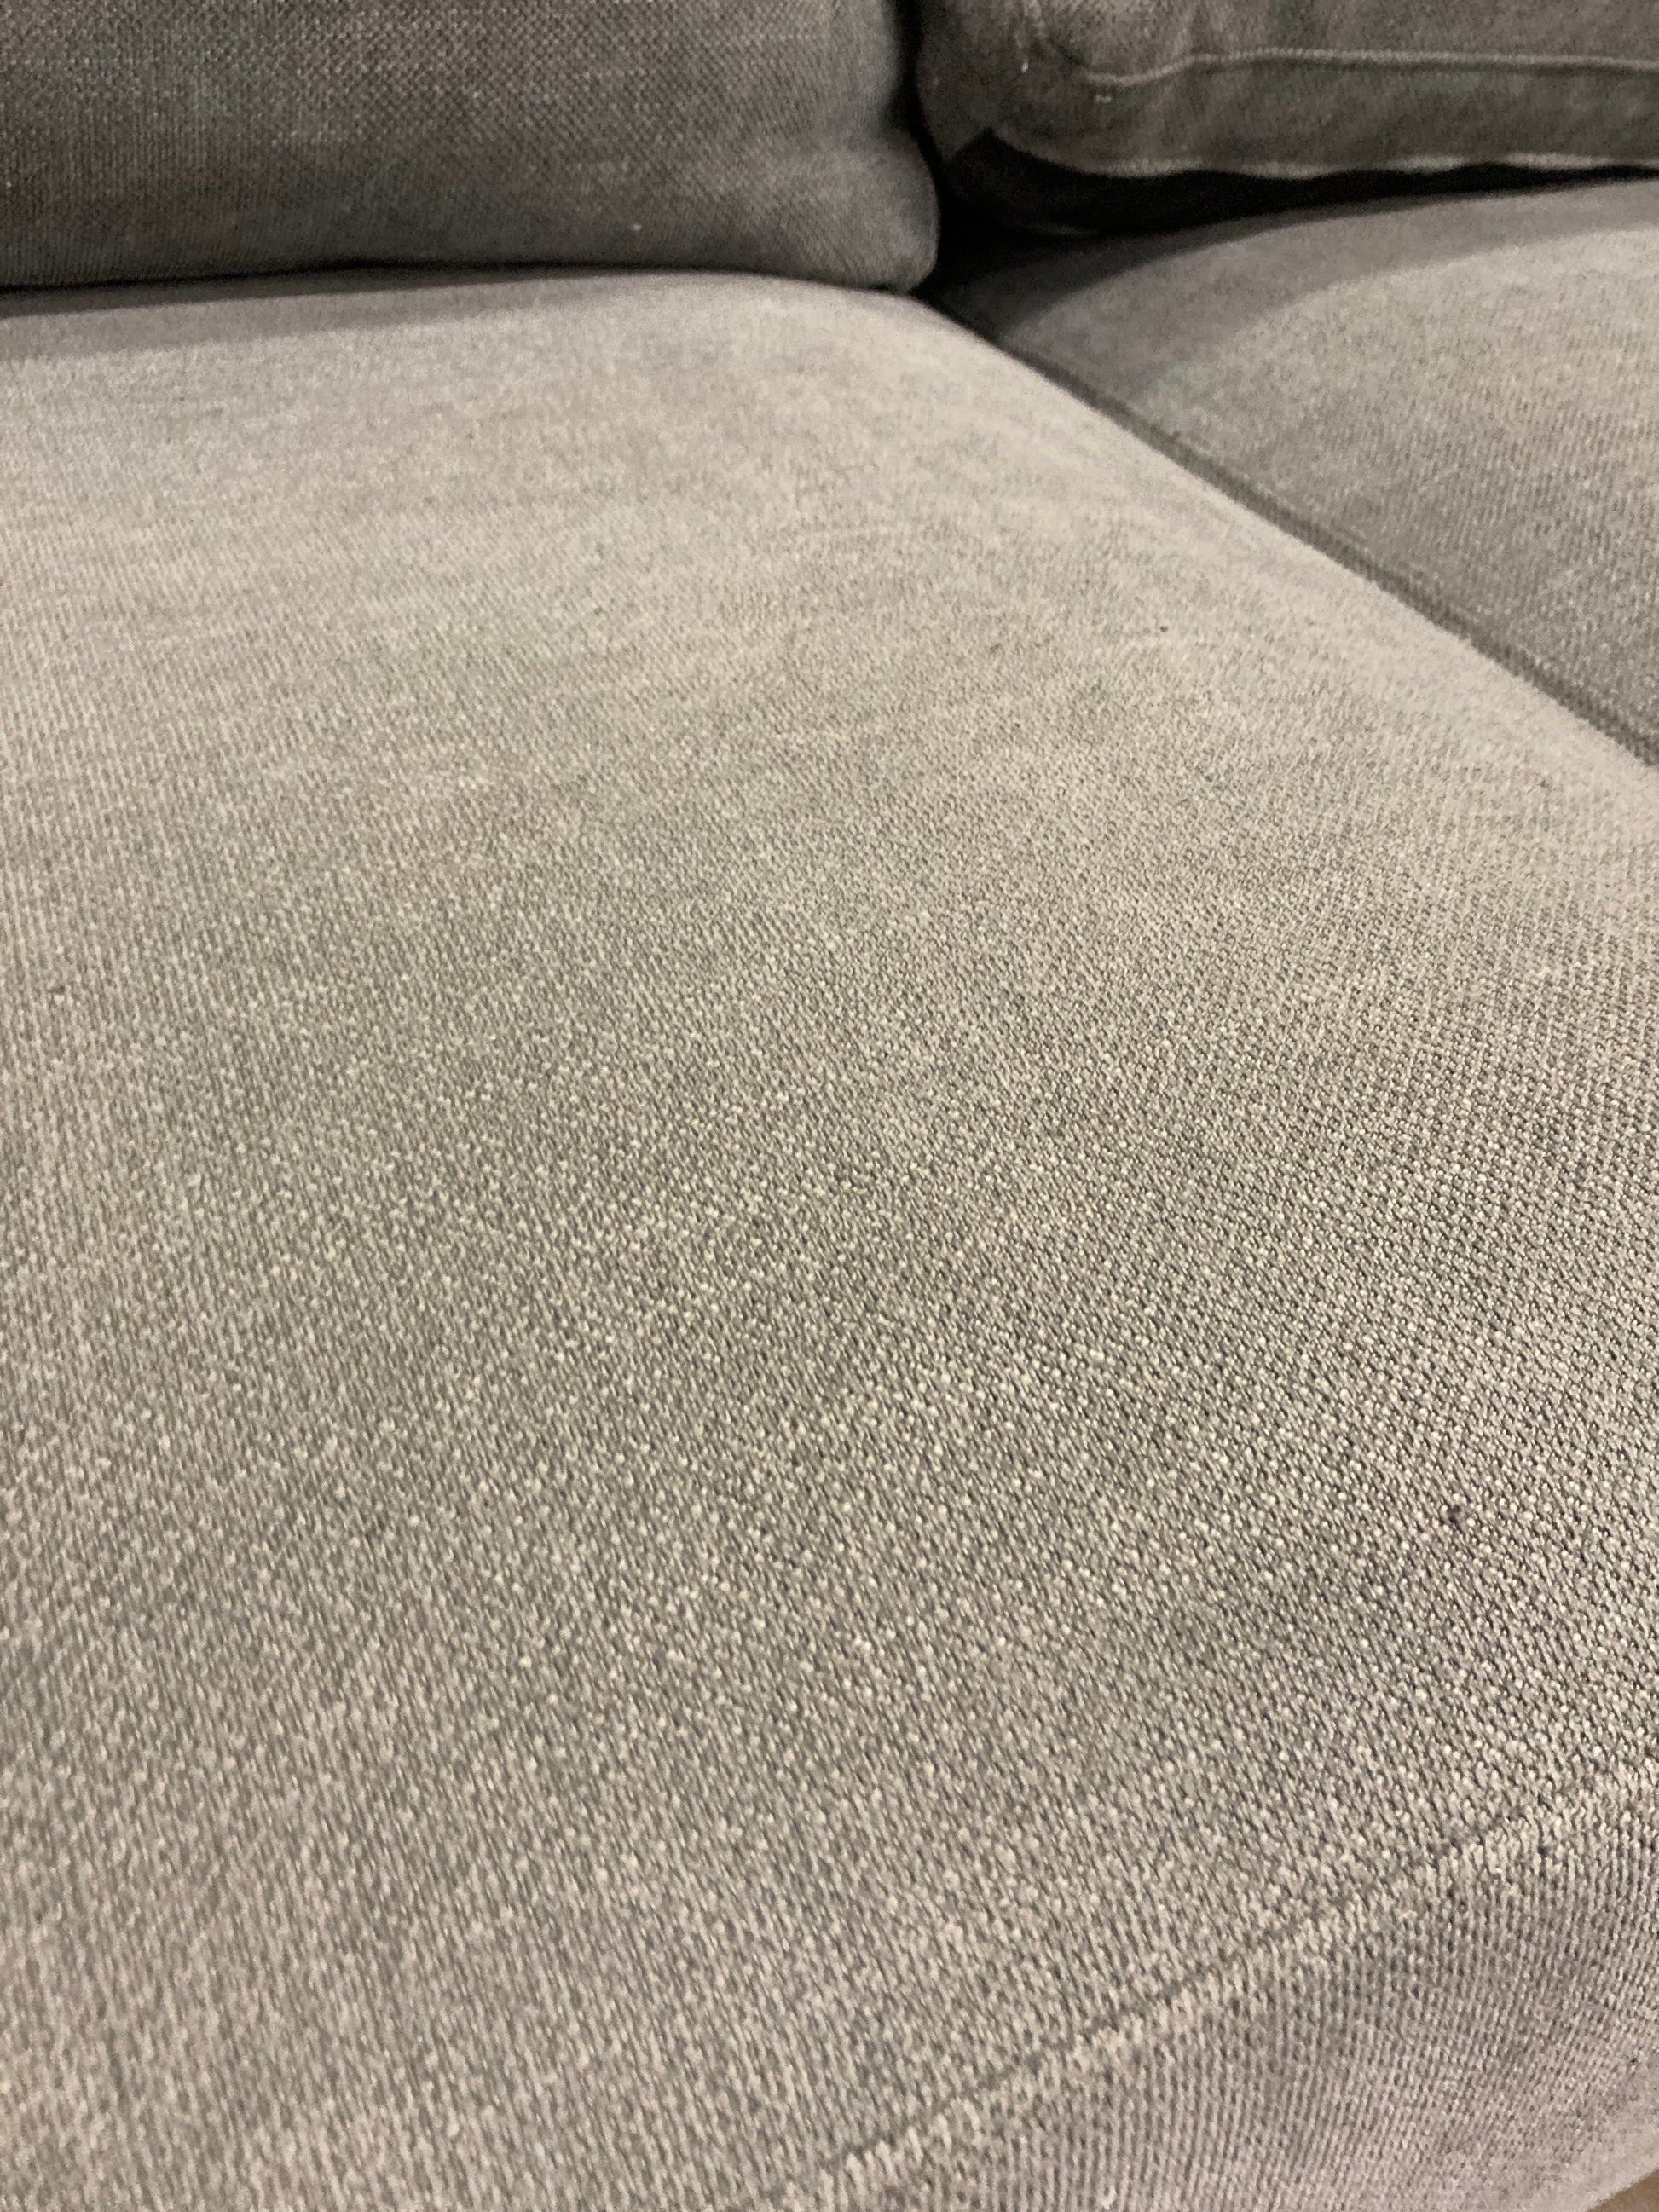 Costco - Ellery Fabric Sectional with Ottoman - Retail $799 Default Title